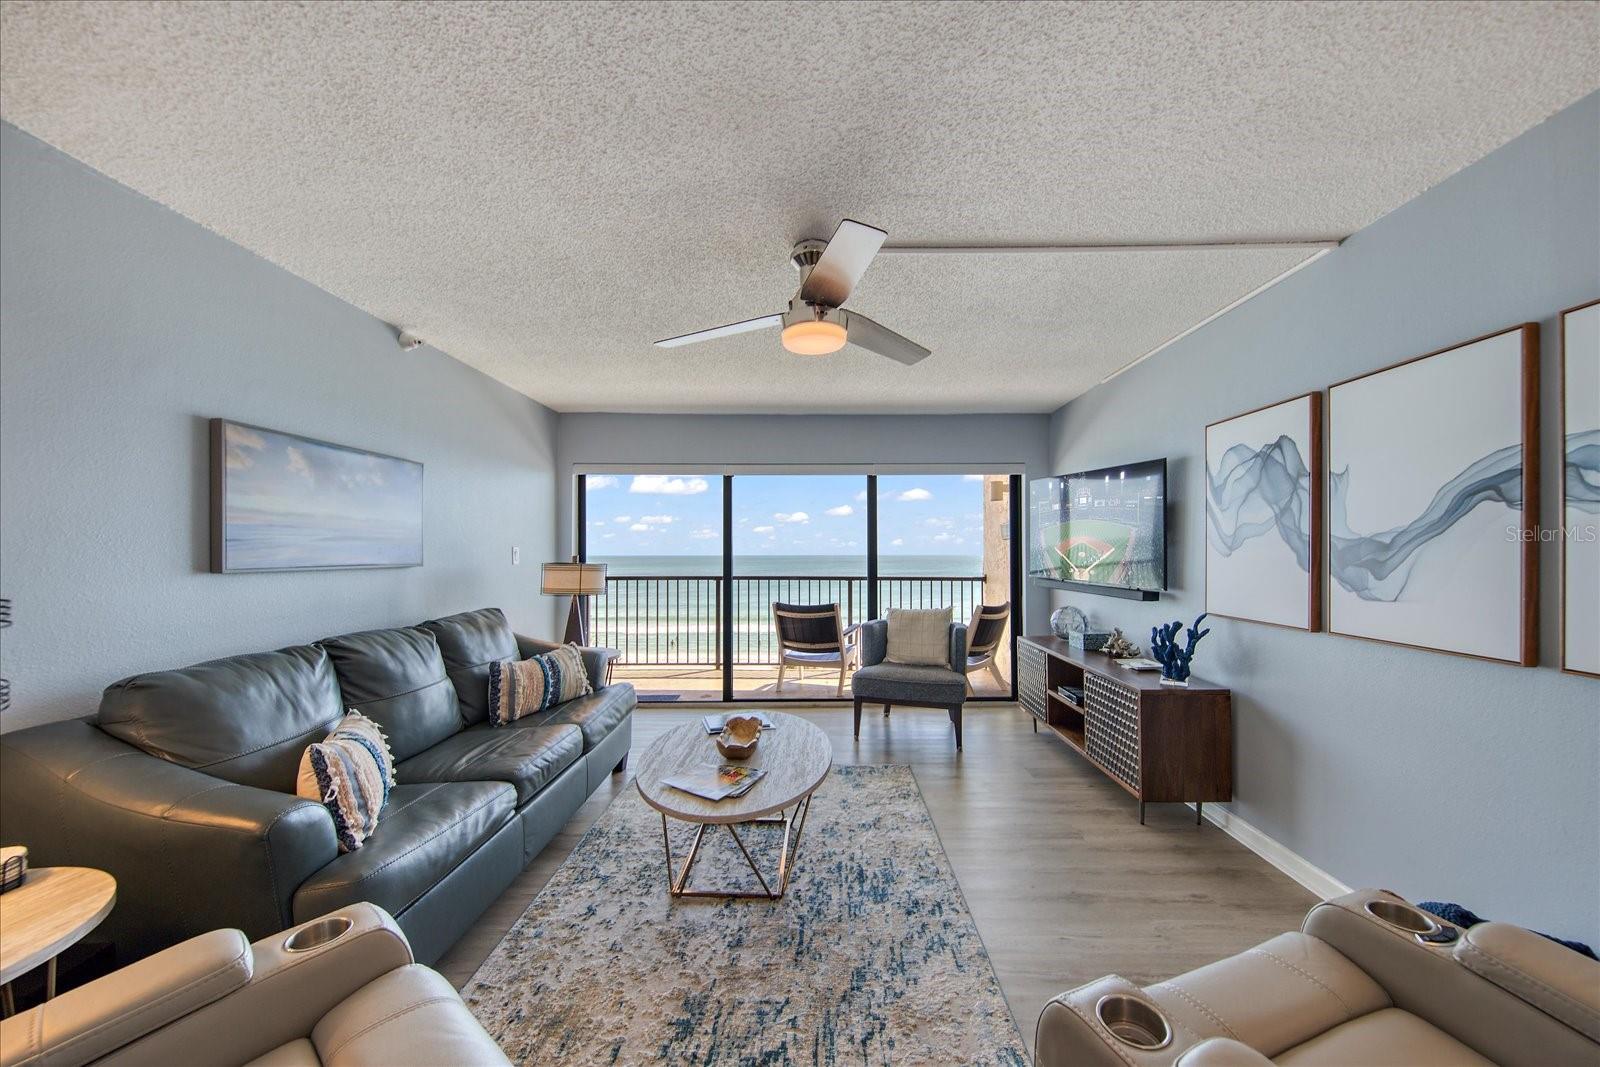 You have beach views from all angels in this large living room.  New furnishings and classy beach decor